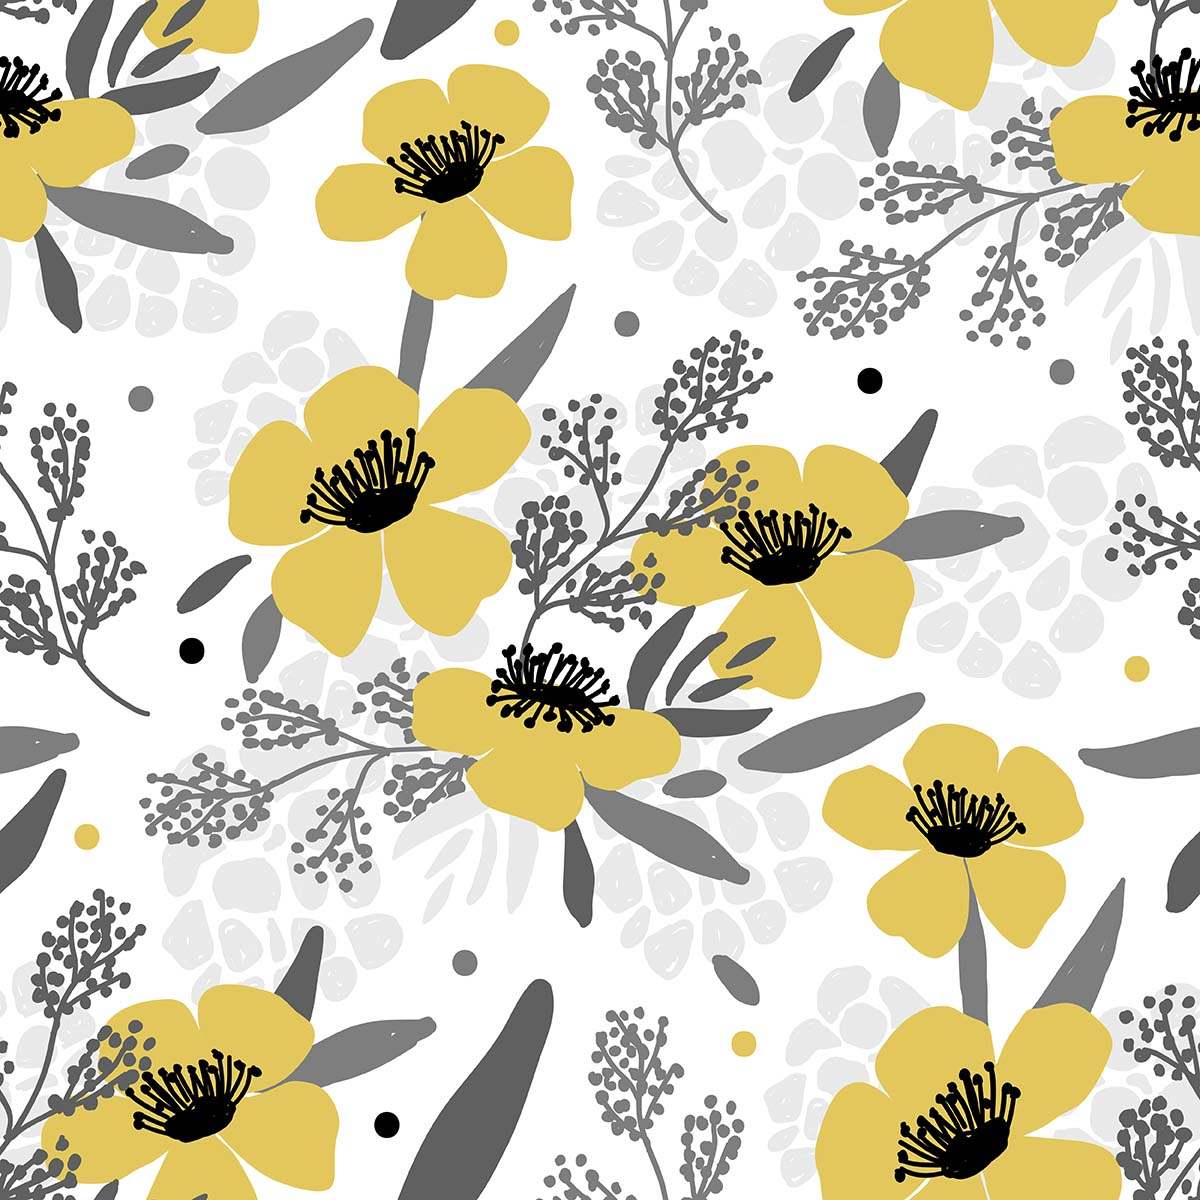 A pattern of yellow flowers and leaves